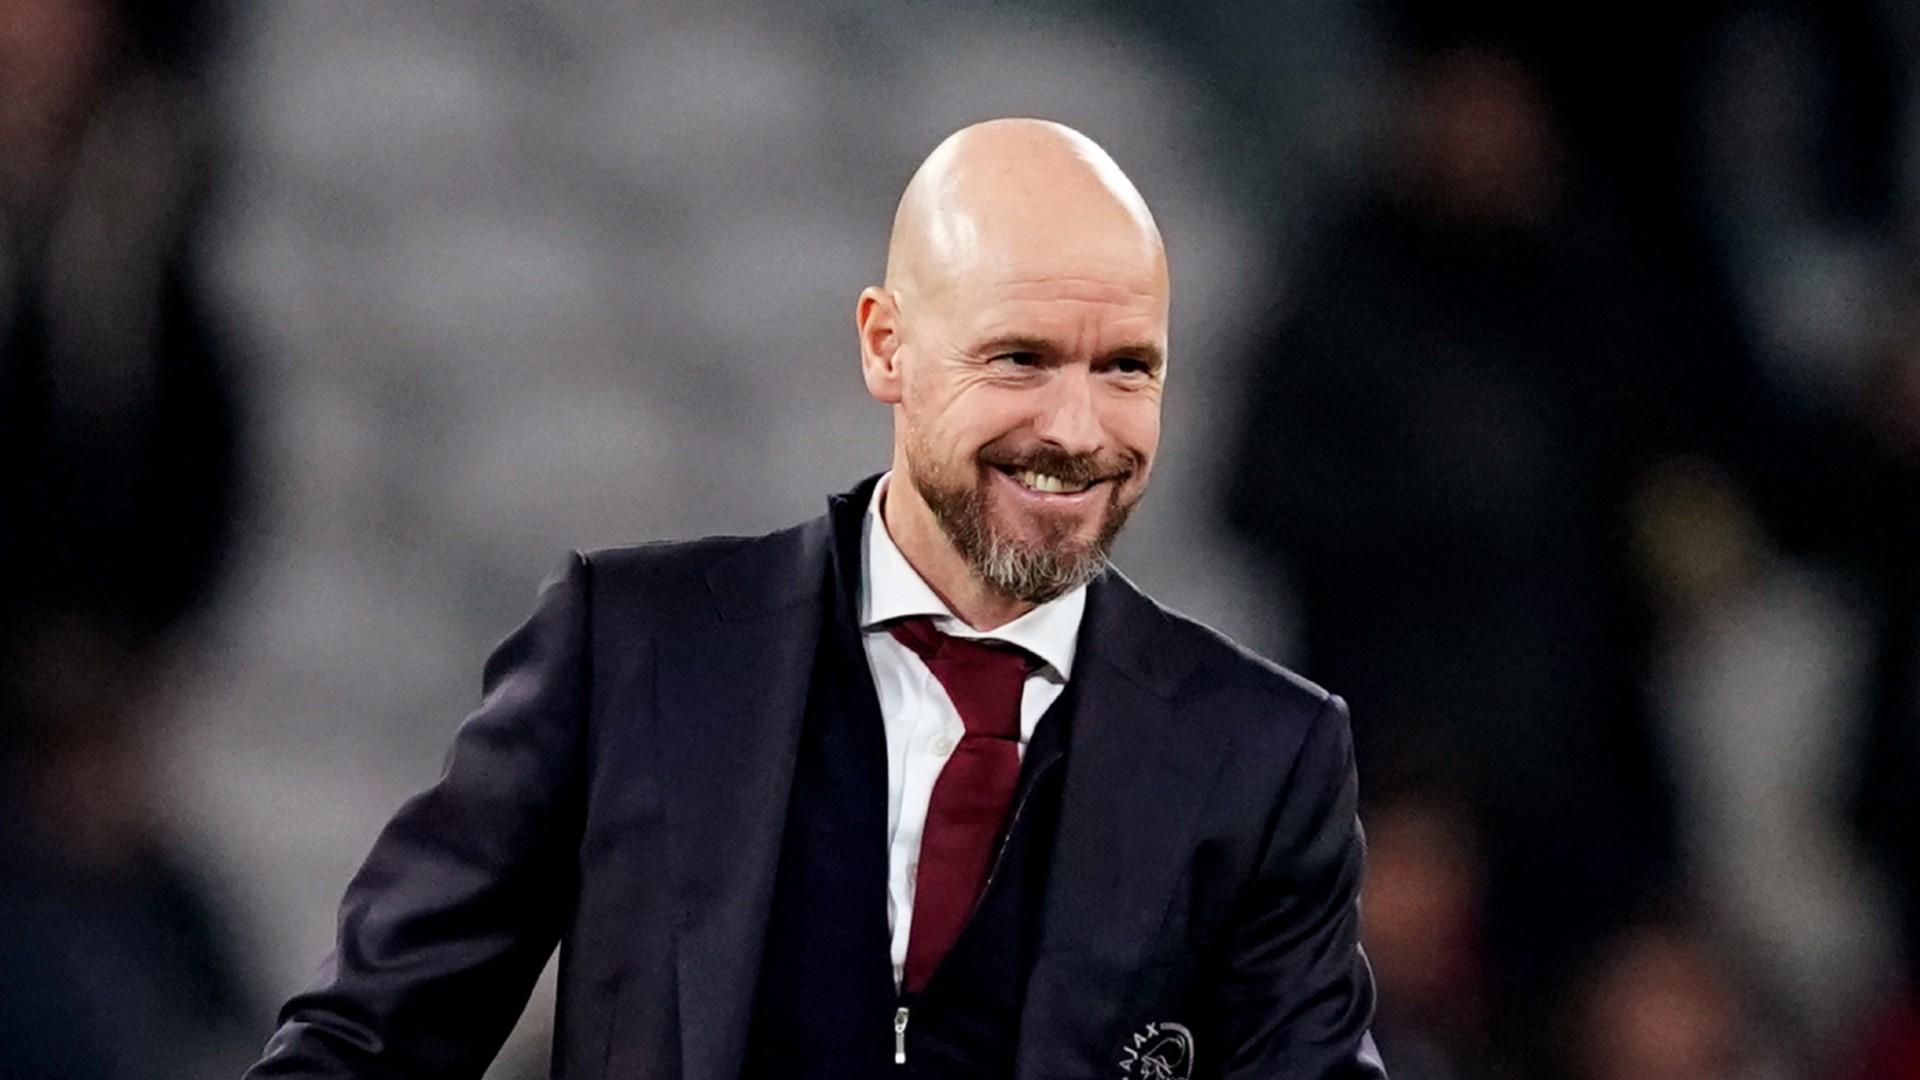 They are ready for Arsenal -- Erik ten Hag